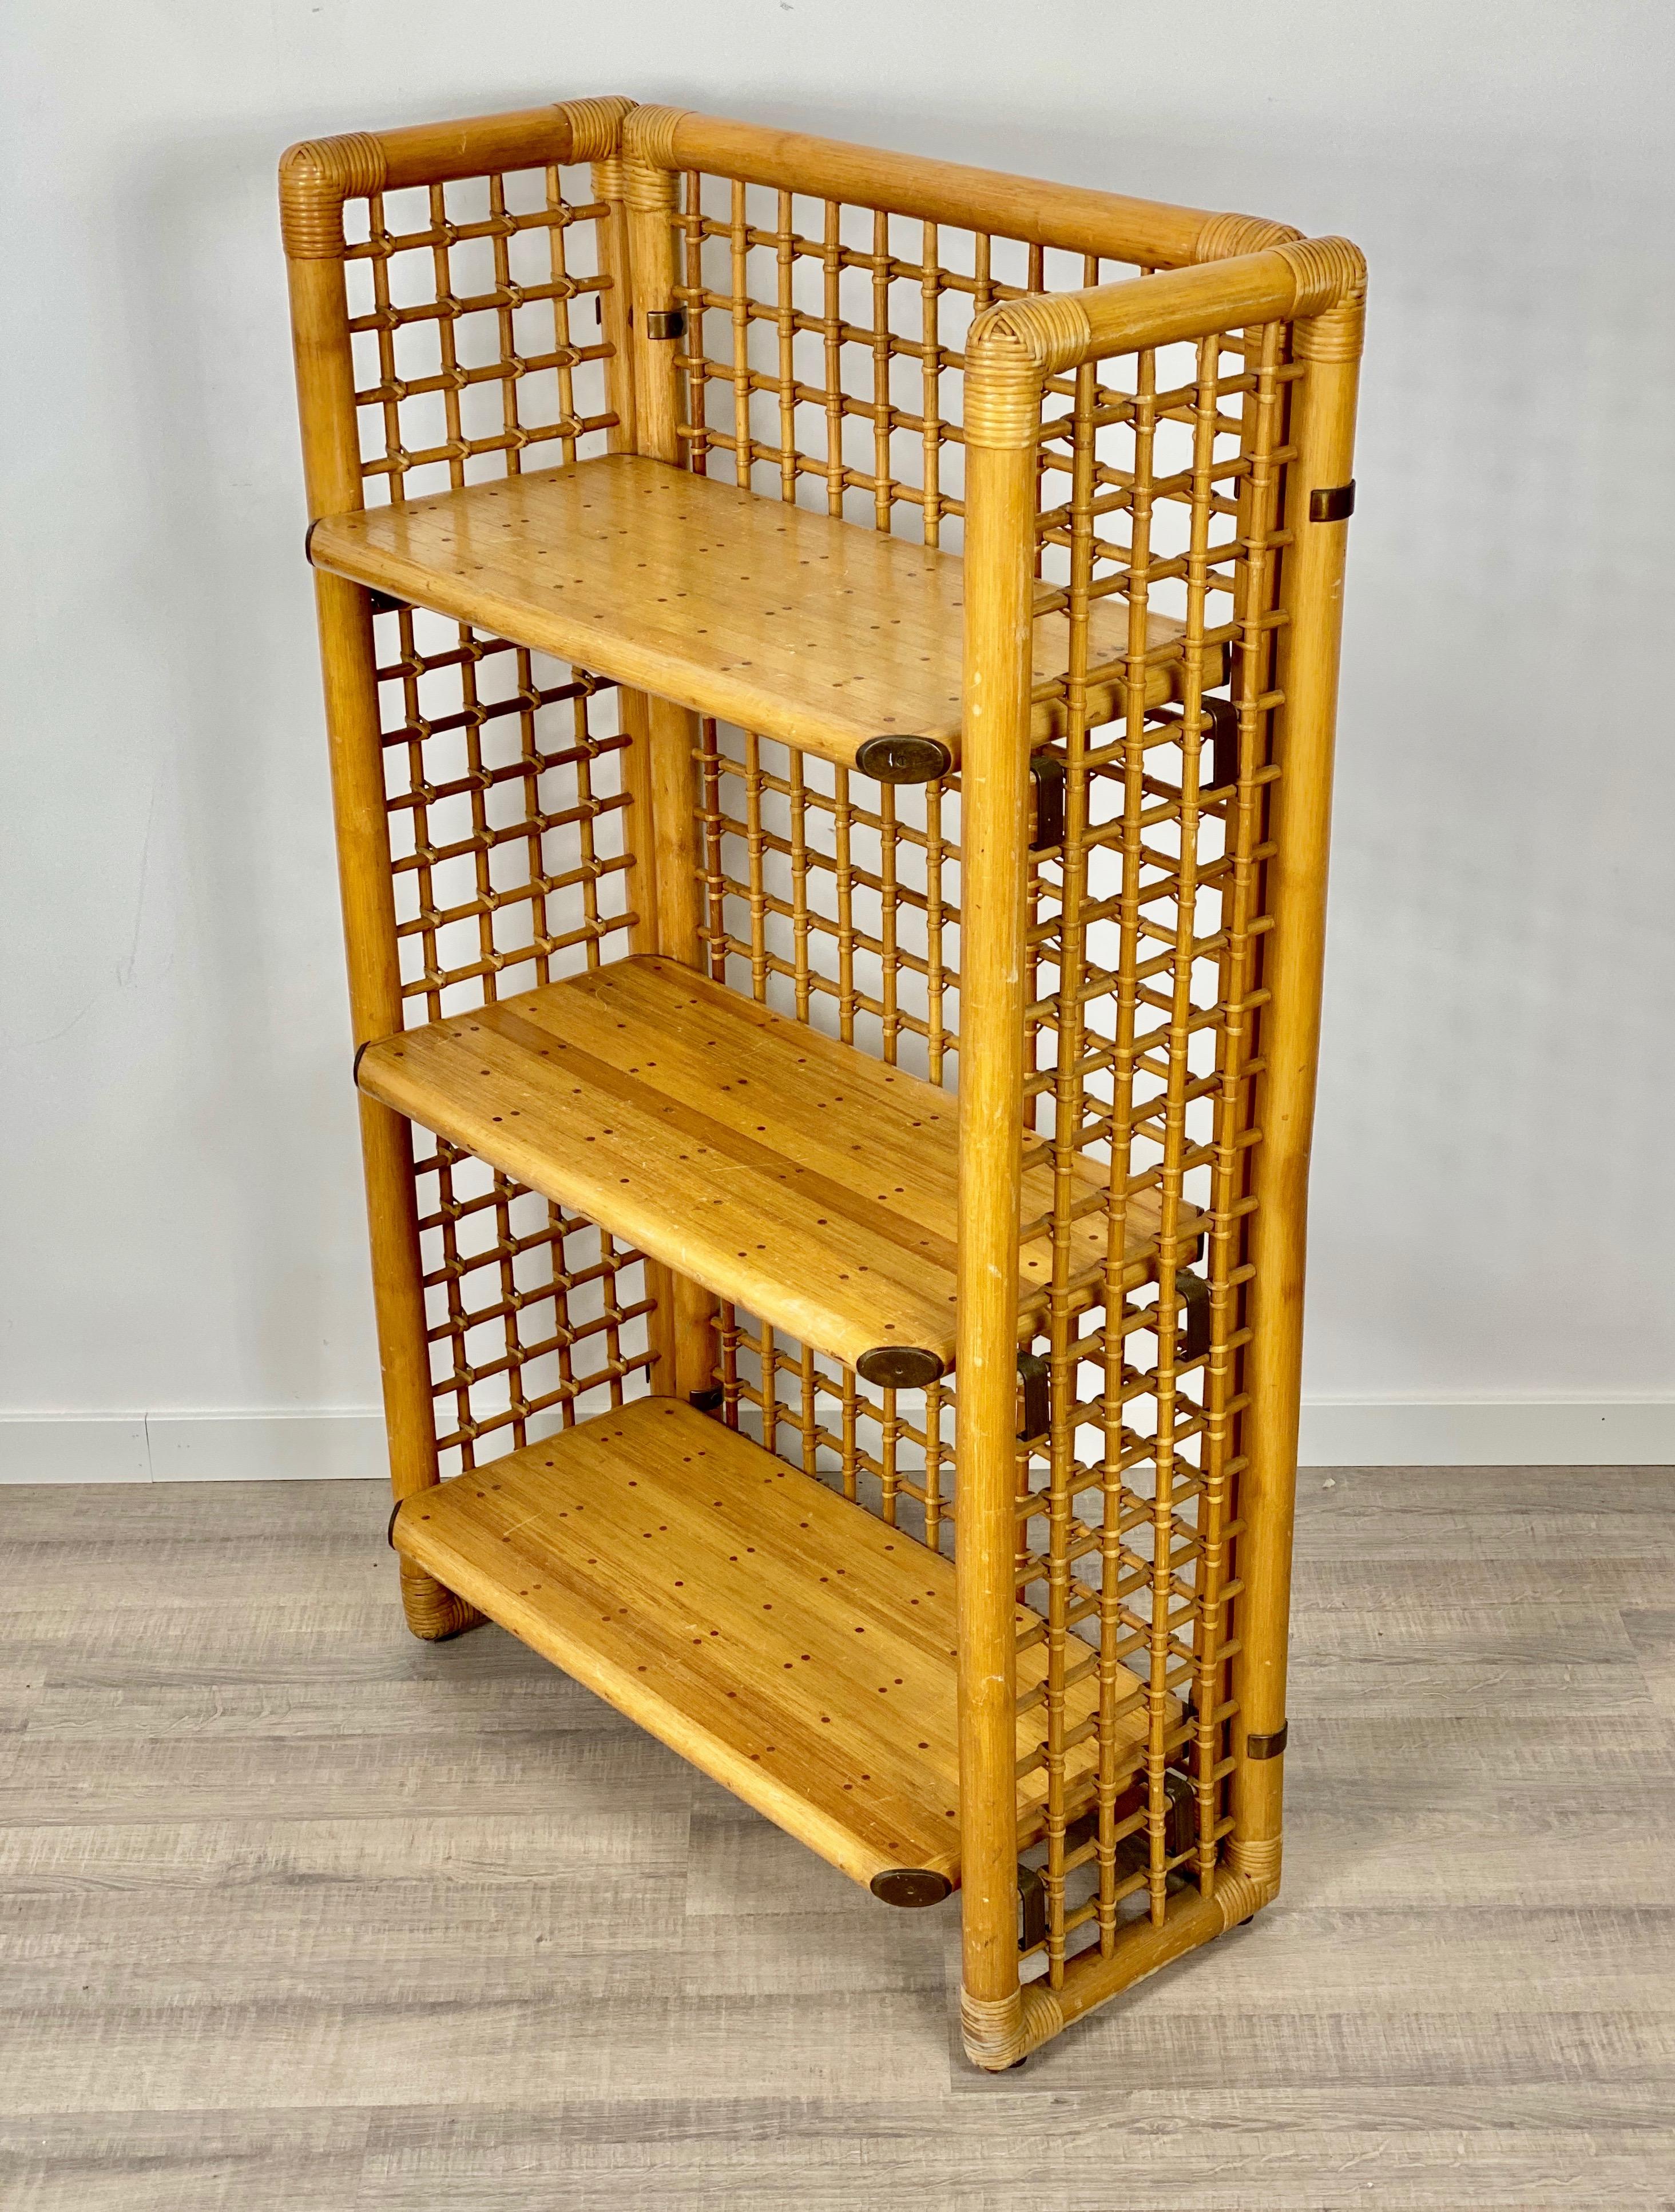 Etagere/bookcase shelf in bamboo rattan with brass details in the corners and shelves. A typical piece of the Italian design of the 1960s.